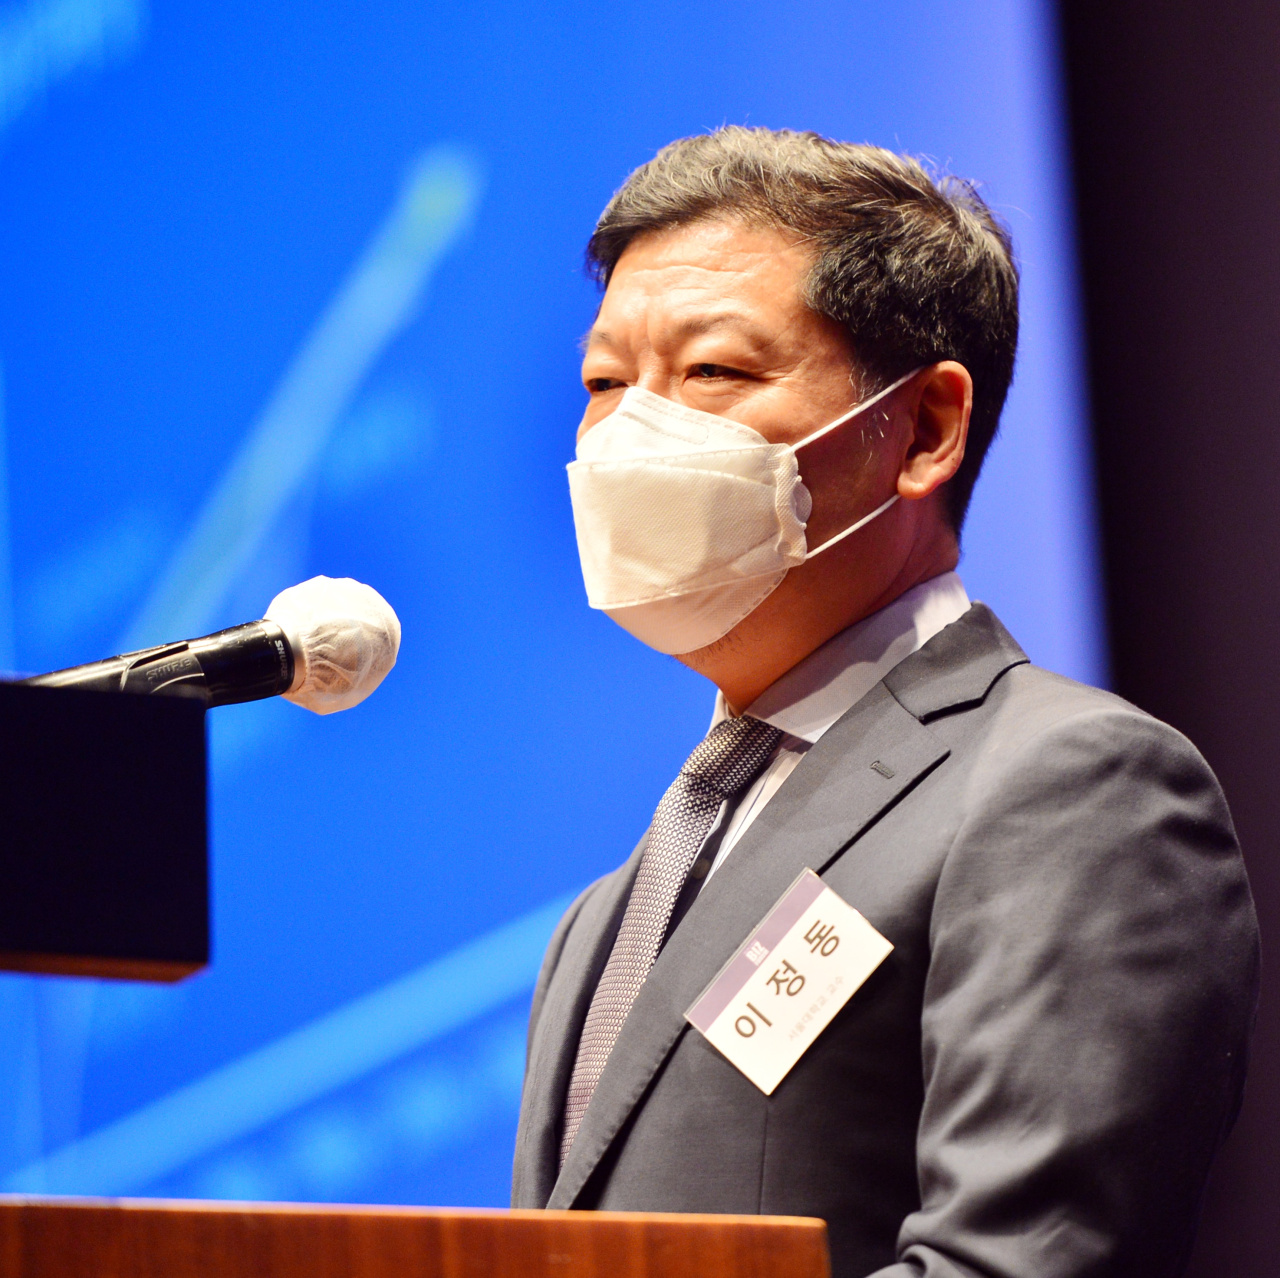 Professor Lee Jeong-dong of Seoul National University gives a keynote speech at this year’s the Korea Herald Biz Forum held at the Shilla Seoul on Tuesday. (Park Hyun-koo/The Korea Herald)